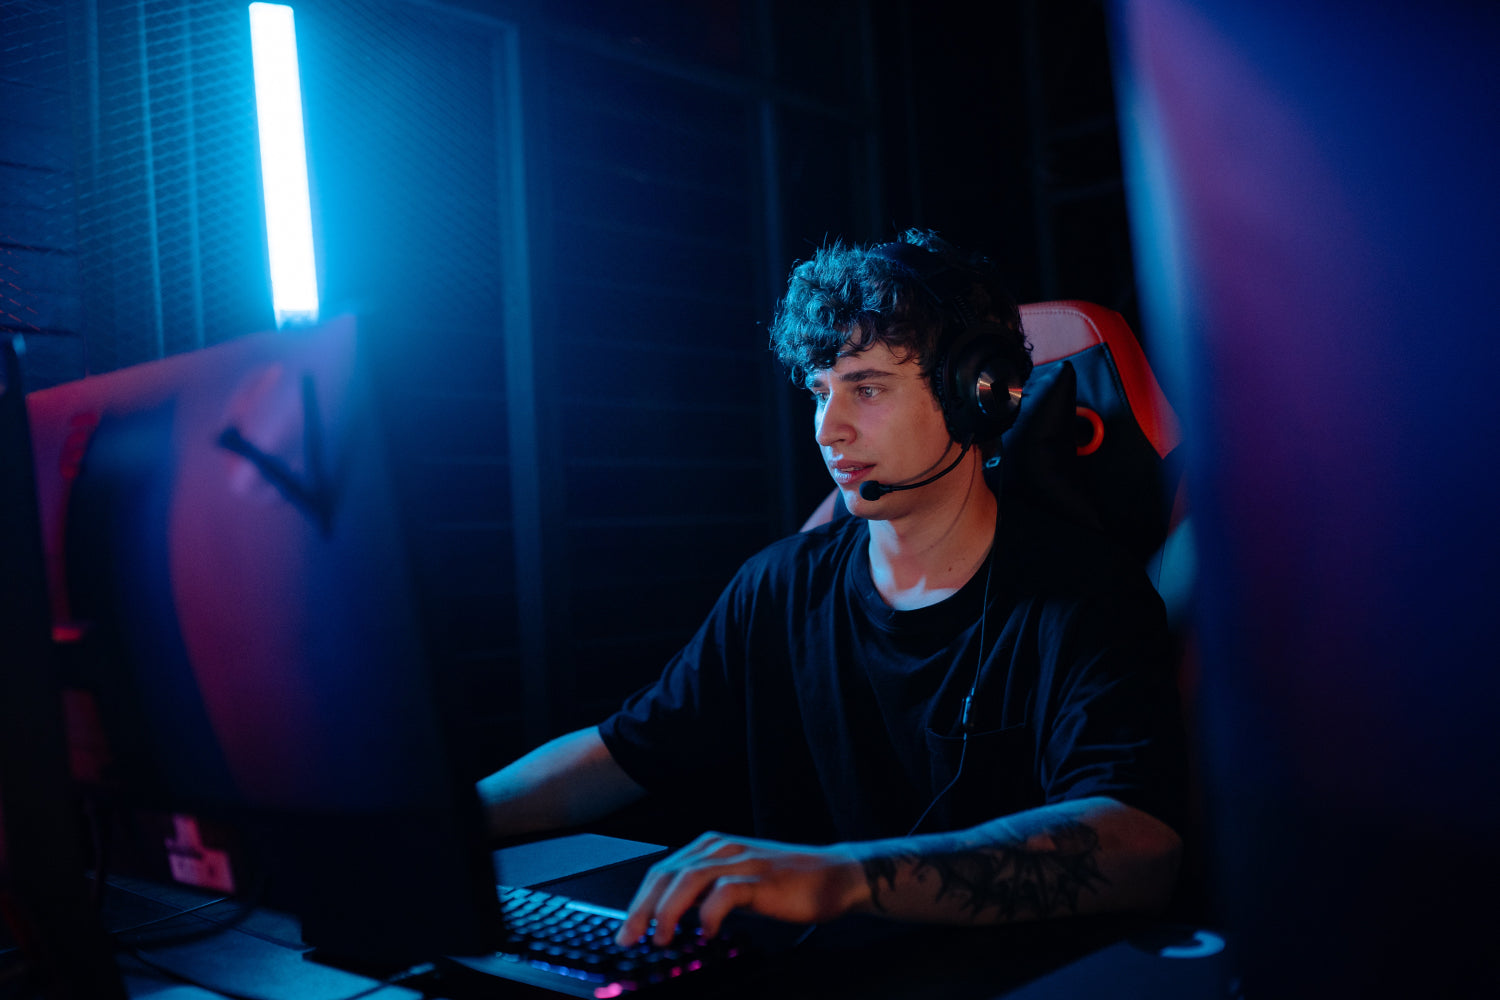 A young person makes money online wearing a headset and playing video games